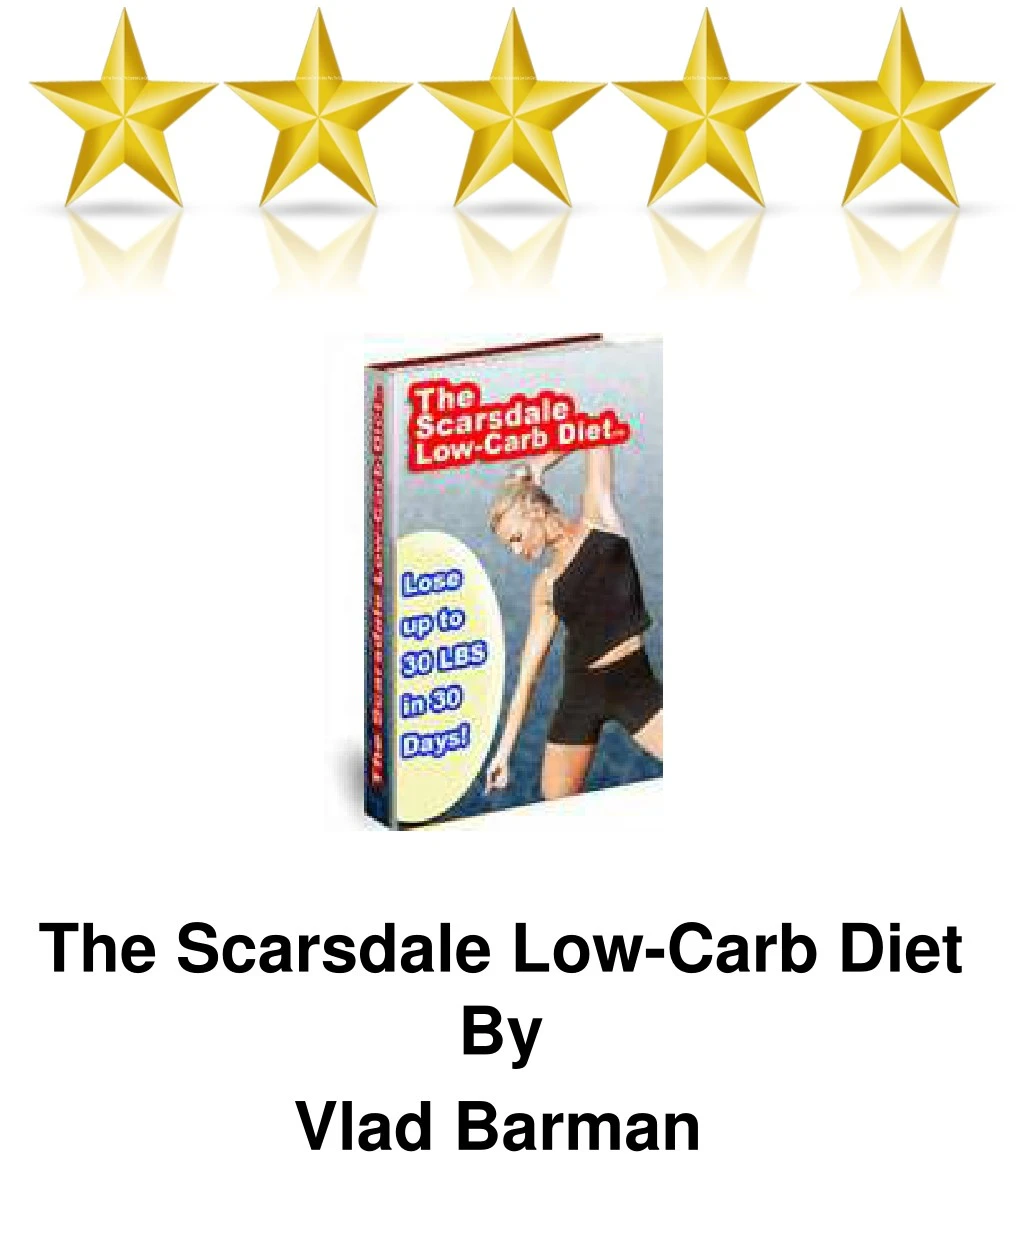 the scarsdale low carb diet pdf ebook free